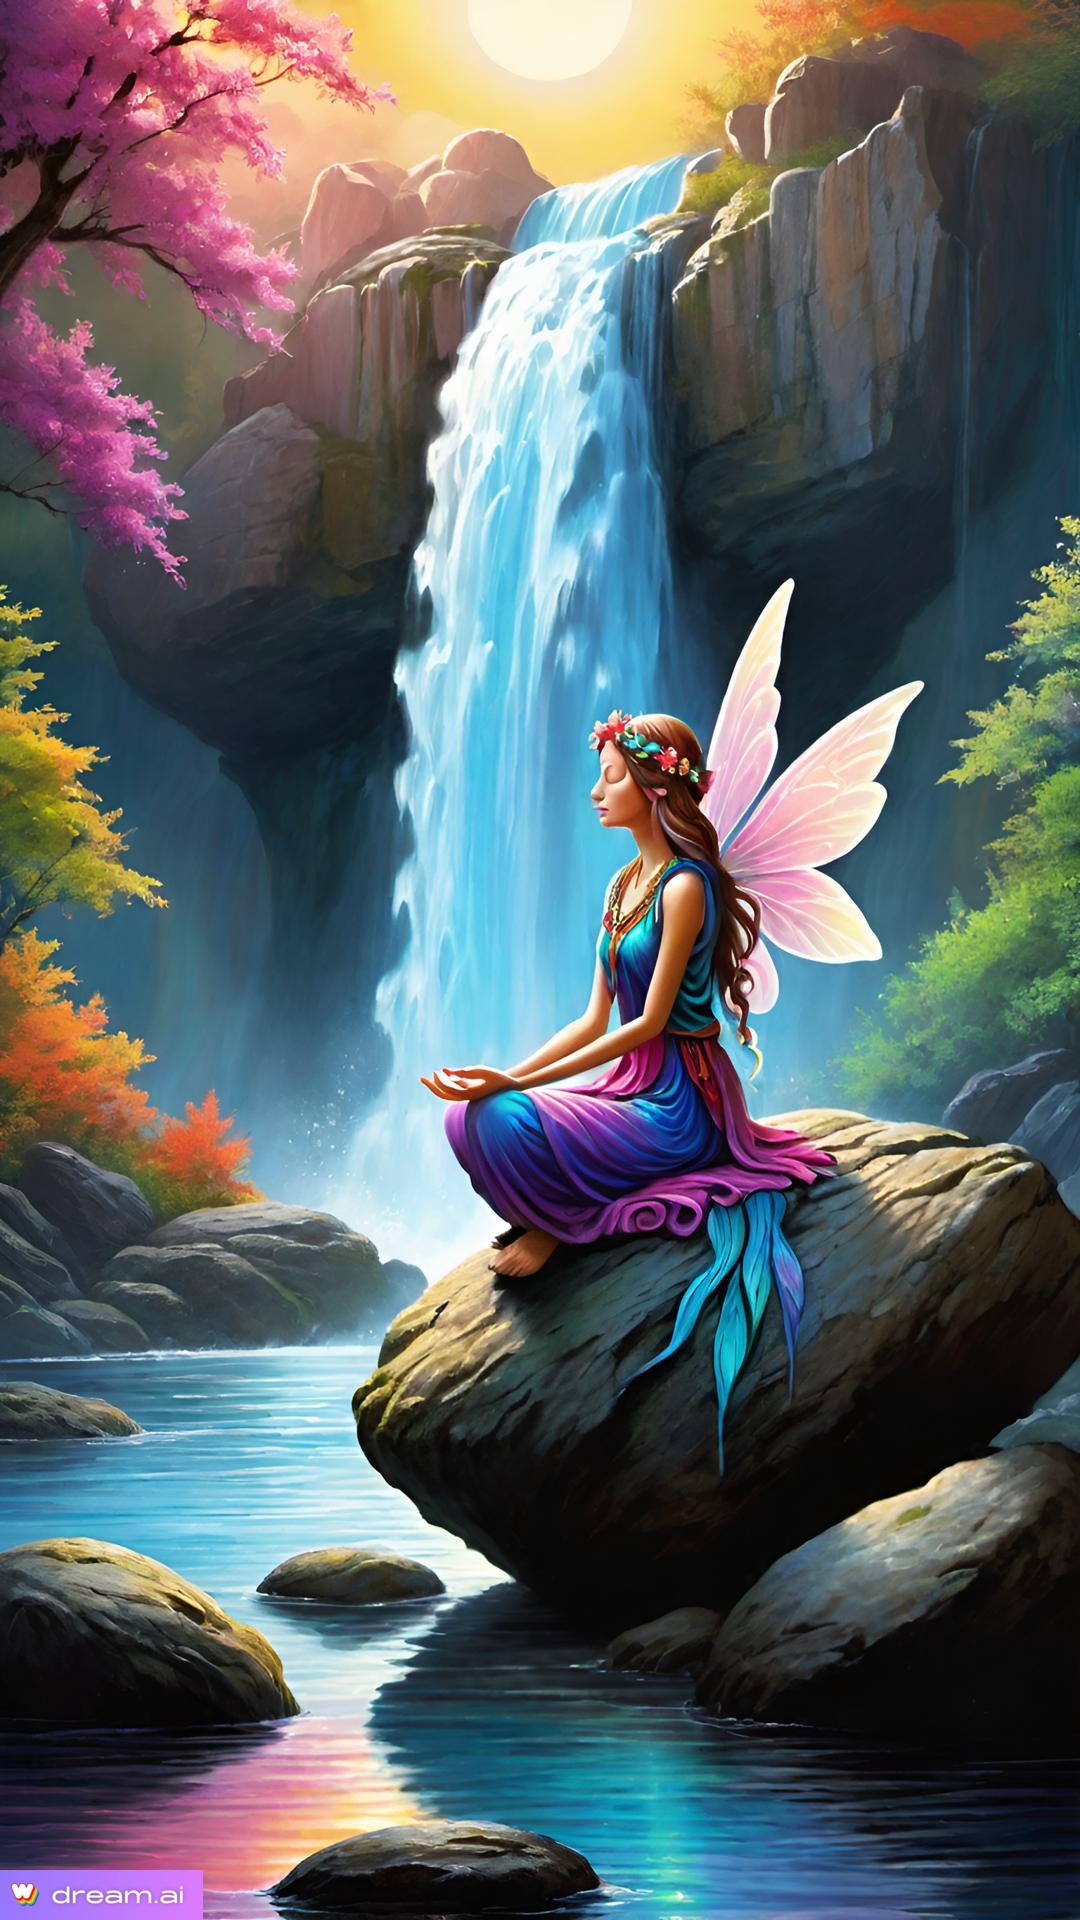 a painting of a fairy sitting on a rock by a waterfall